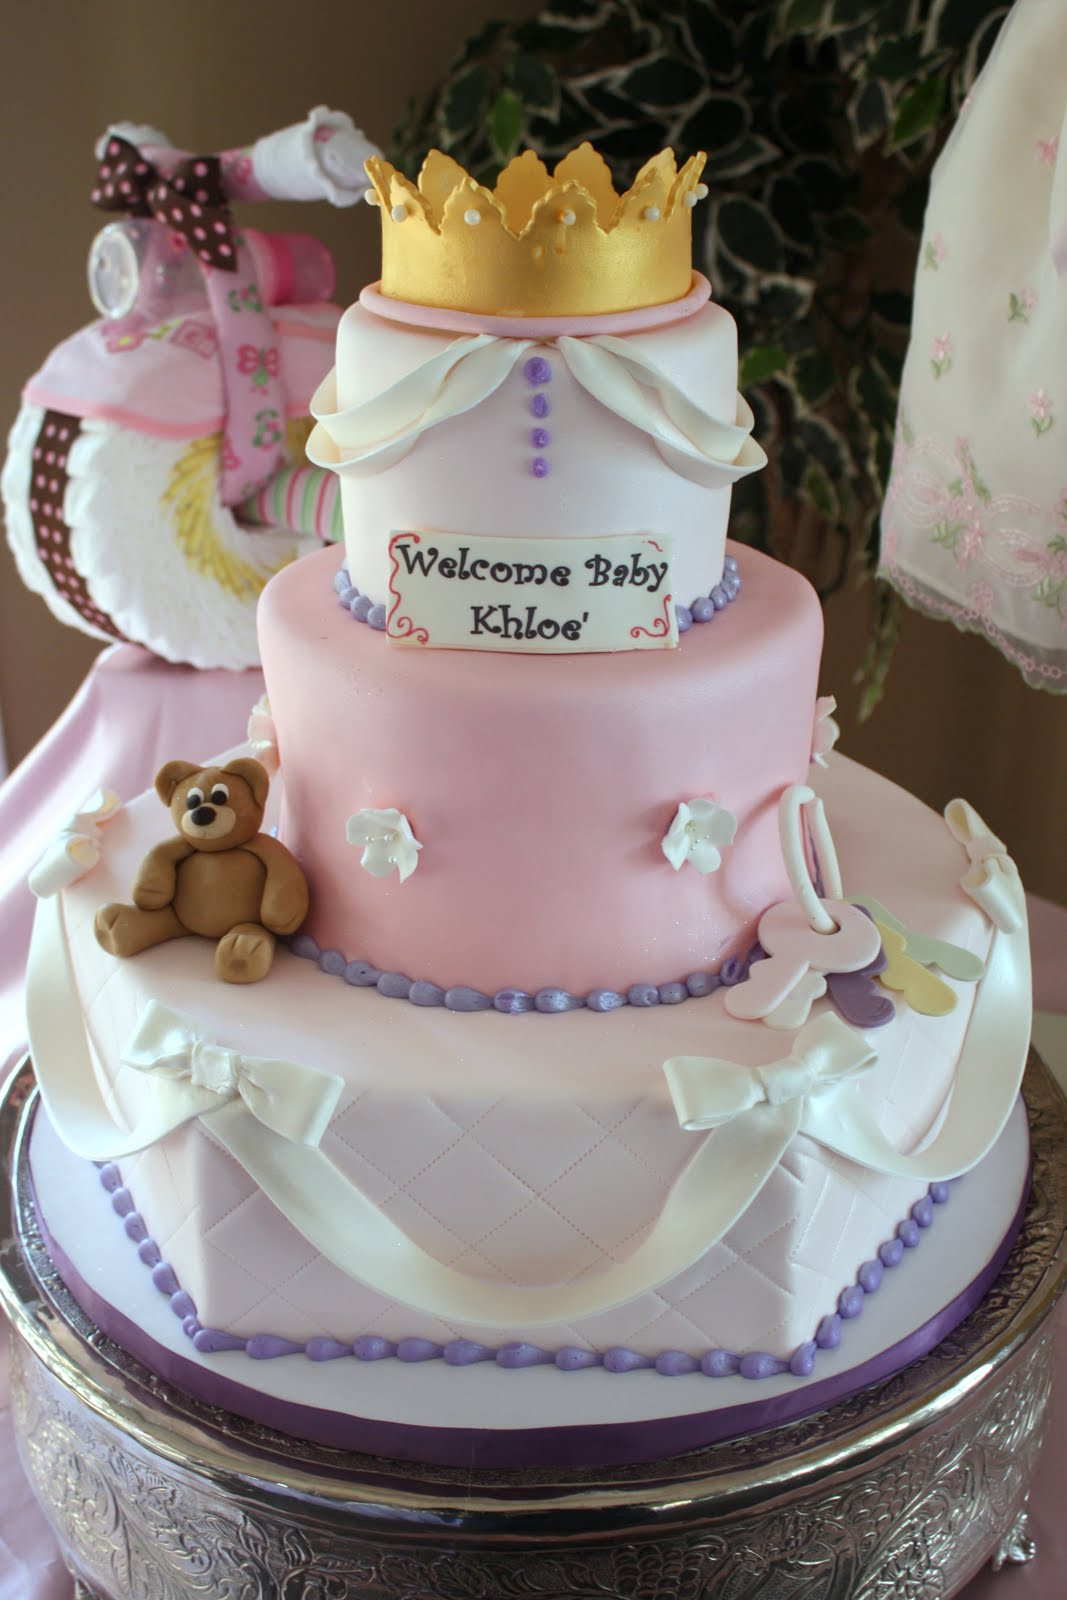 Baby Shower Cakes Recipes
 Cakes by La’Meeka Some fun baby shower and kids cakes